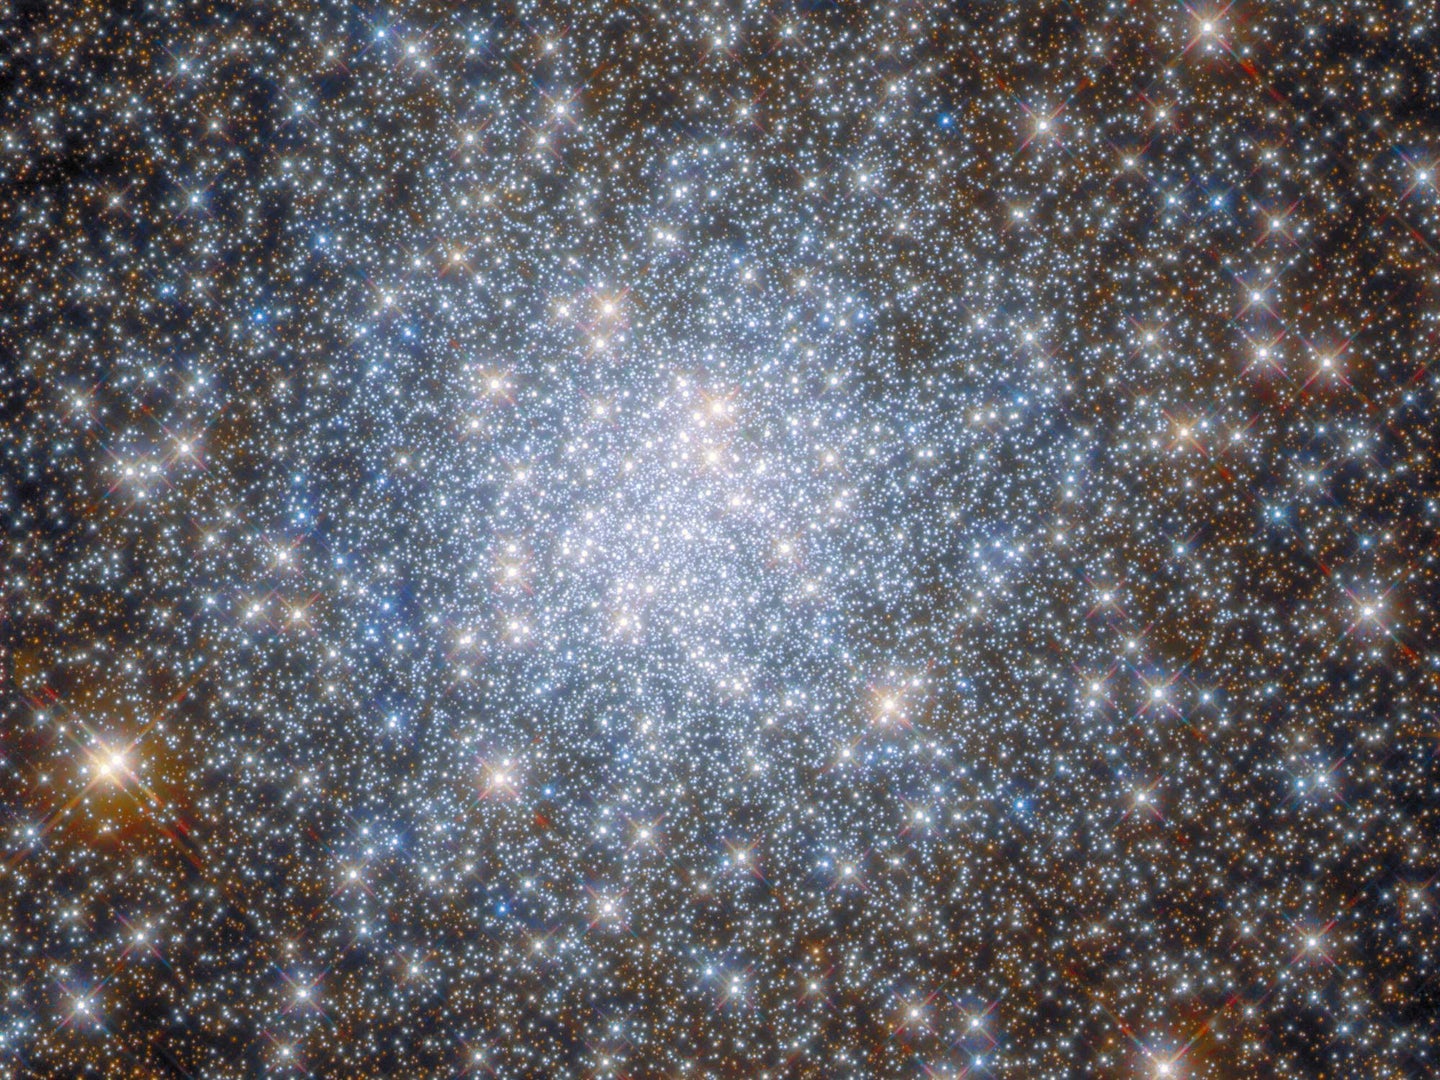 The tightly bound globular cluster pictured here sits within the  constellation Sagittarius.